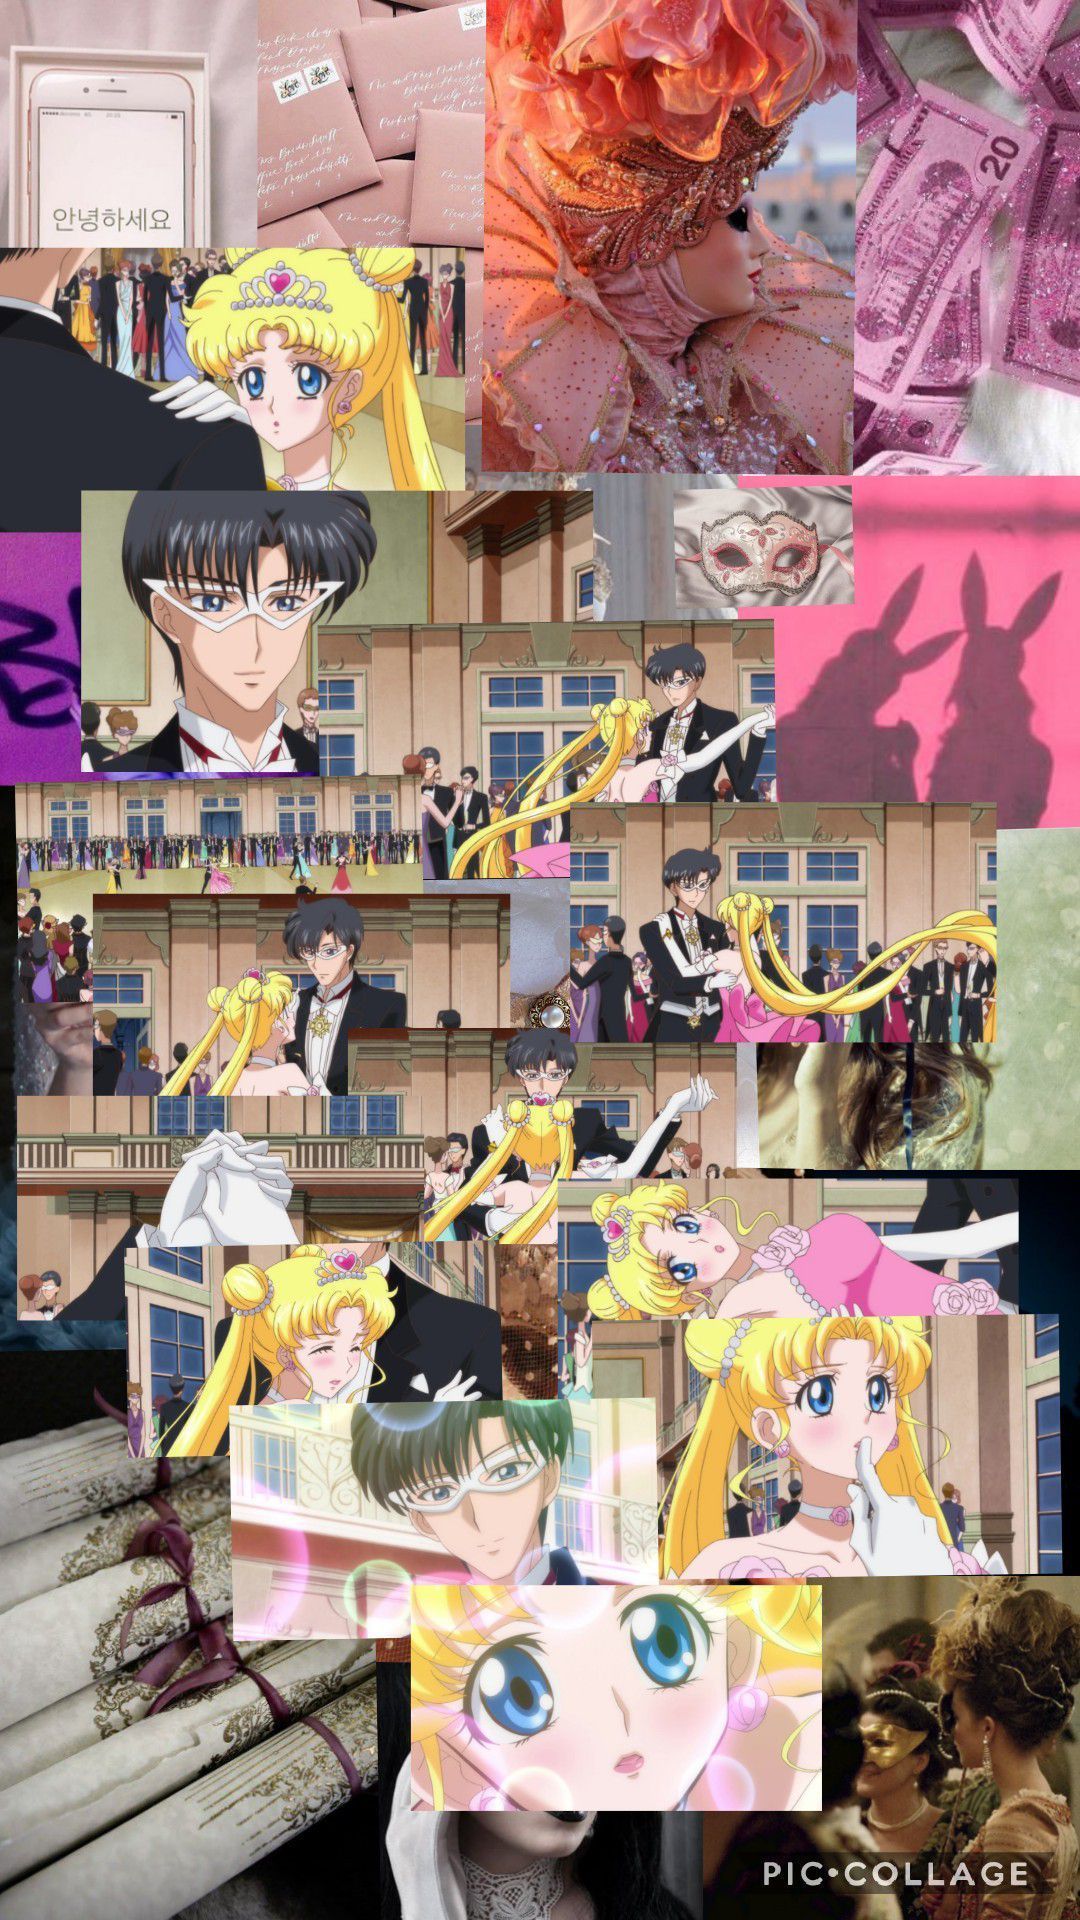 A collage of images with different characters - Sailor Moon